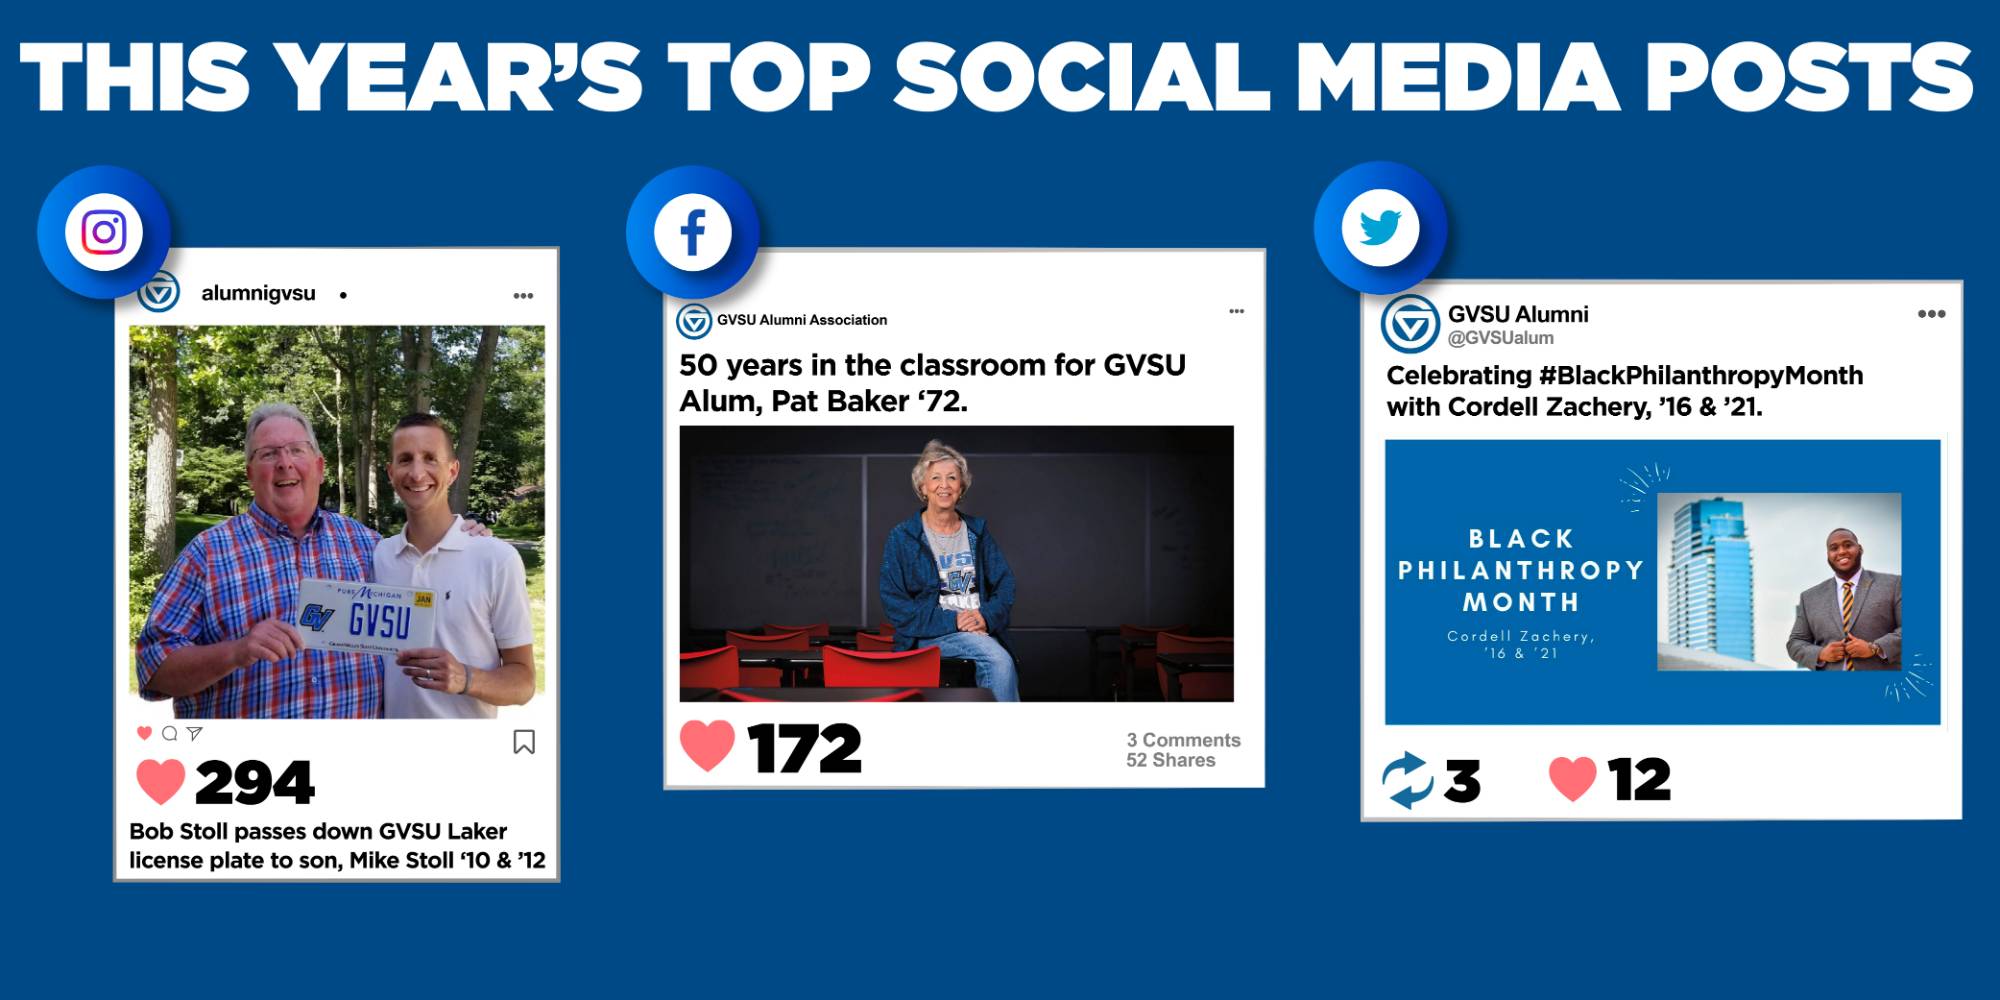 This year's top social media posts include; Instagram: photo of Bob Stoll, former associate dean of student life, passing down his GVSU license plate to his son Mike Stoll '10 & '12, which received 1294 Likes. Facebook: Post highlighting Pat Baker '72 50 years as a classroom teacher in Grand Rapids, which received 172 likes. Twitter: Black Philanthropy Month highlight Cordell Zachery '16 & '21, which received 3 retweets and 12 likes.